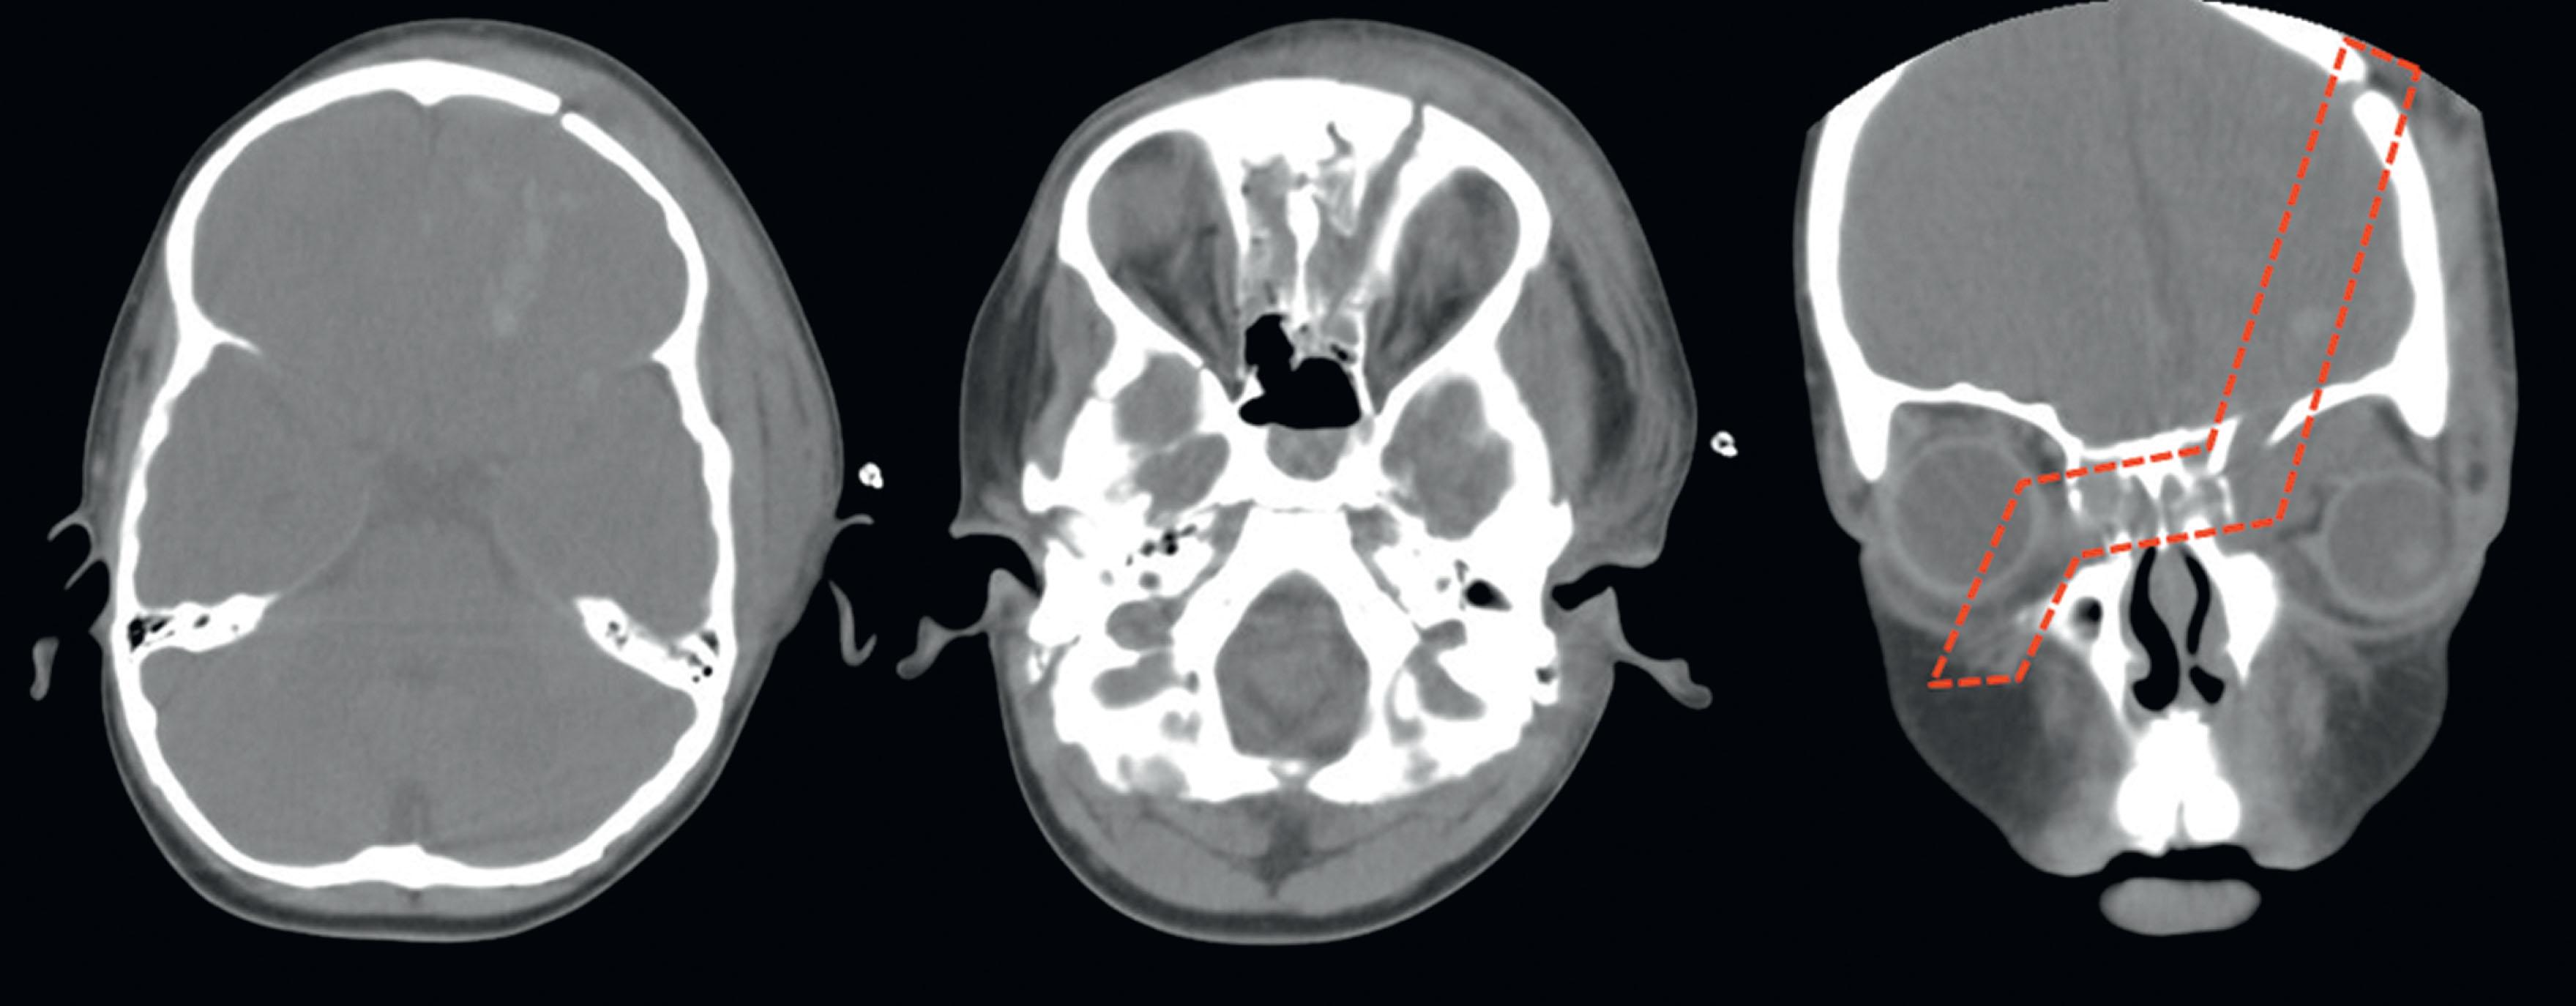 Figure 22.8, Computed tomography (CT) scans in the axial plane demonstrate an oblique fracture at the level of the cranium (left) and cranial base (center). Right, the CT scan represents a sagittal reconstruction of the same patient, with the course of the oblique fracture outlined in red.